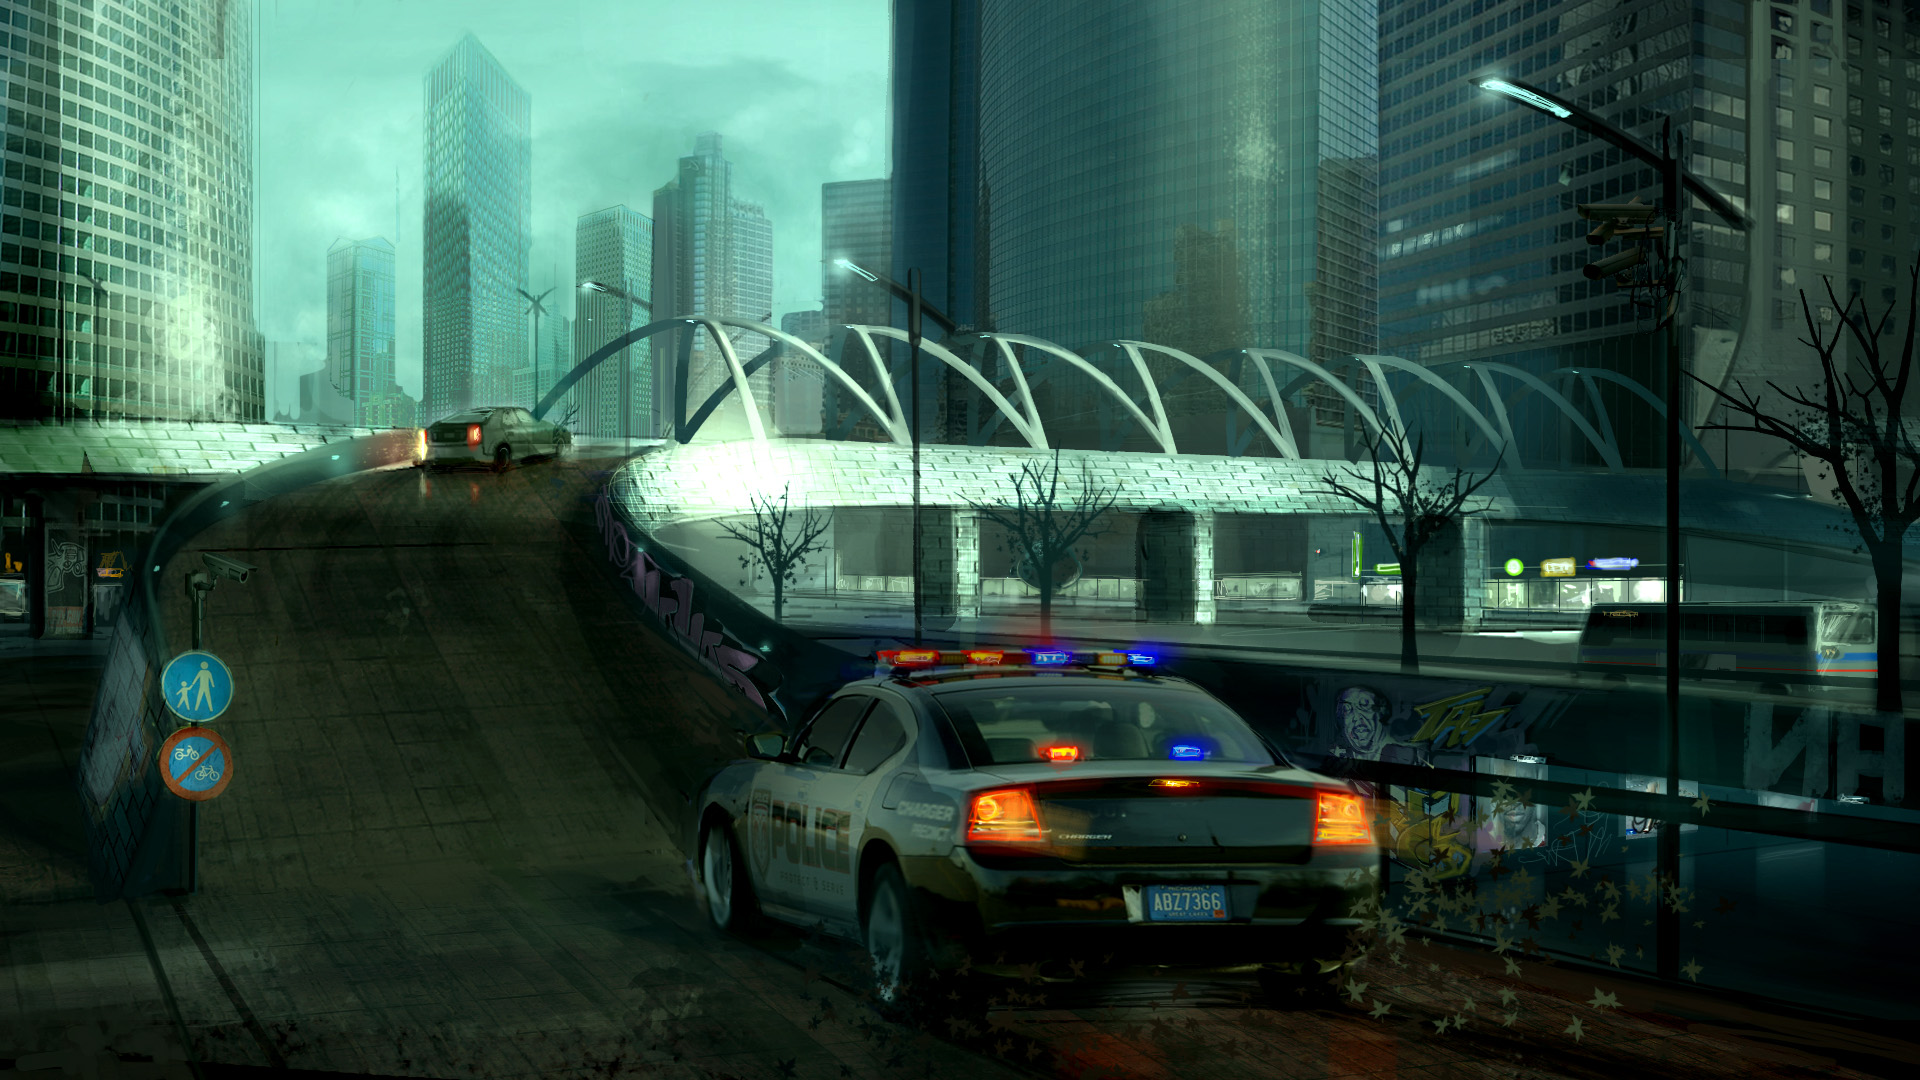 Nfs города. Андерковер город. NFS Undercover город. Need for Speed Undercover 2. NFS Underground 2 город.